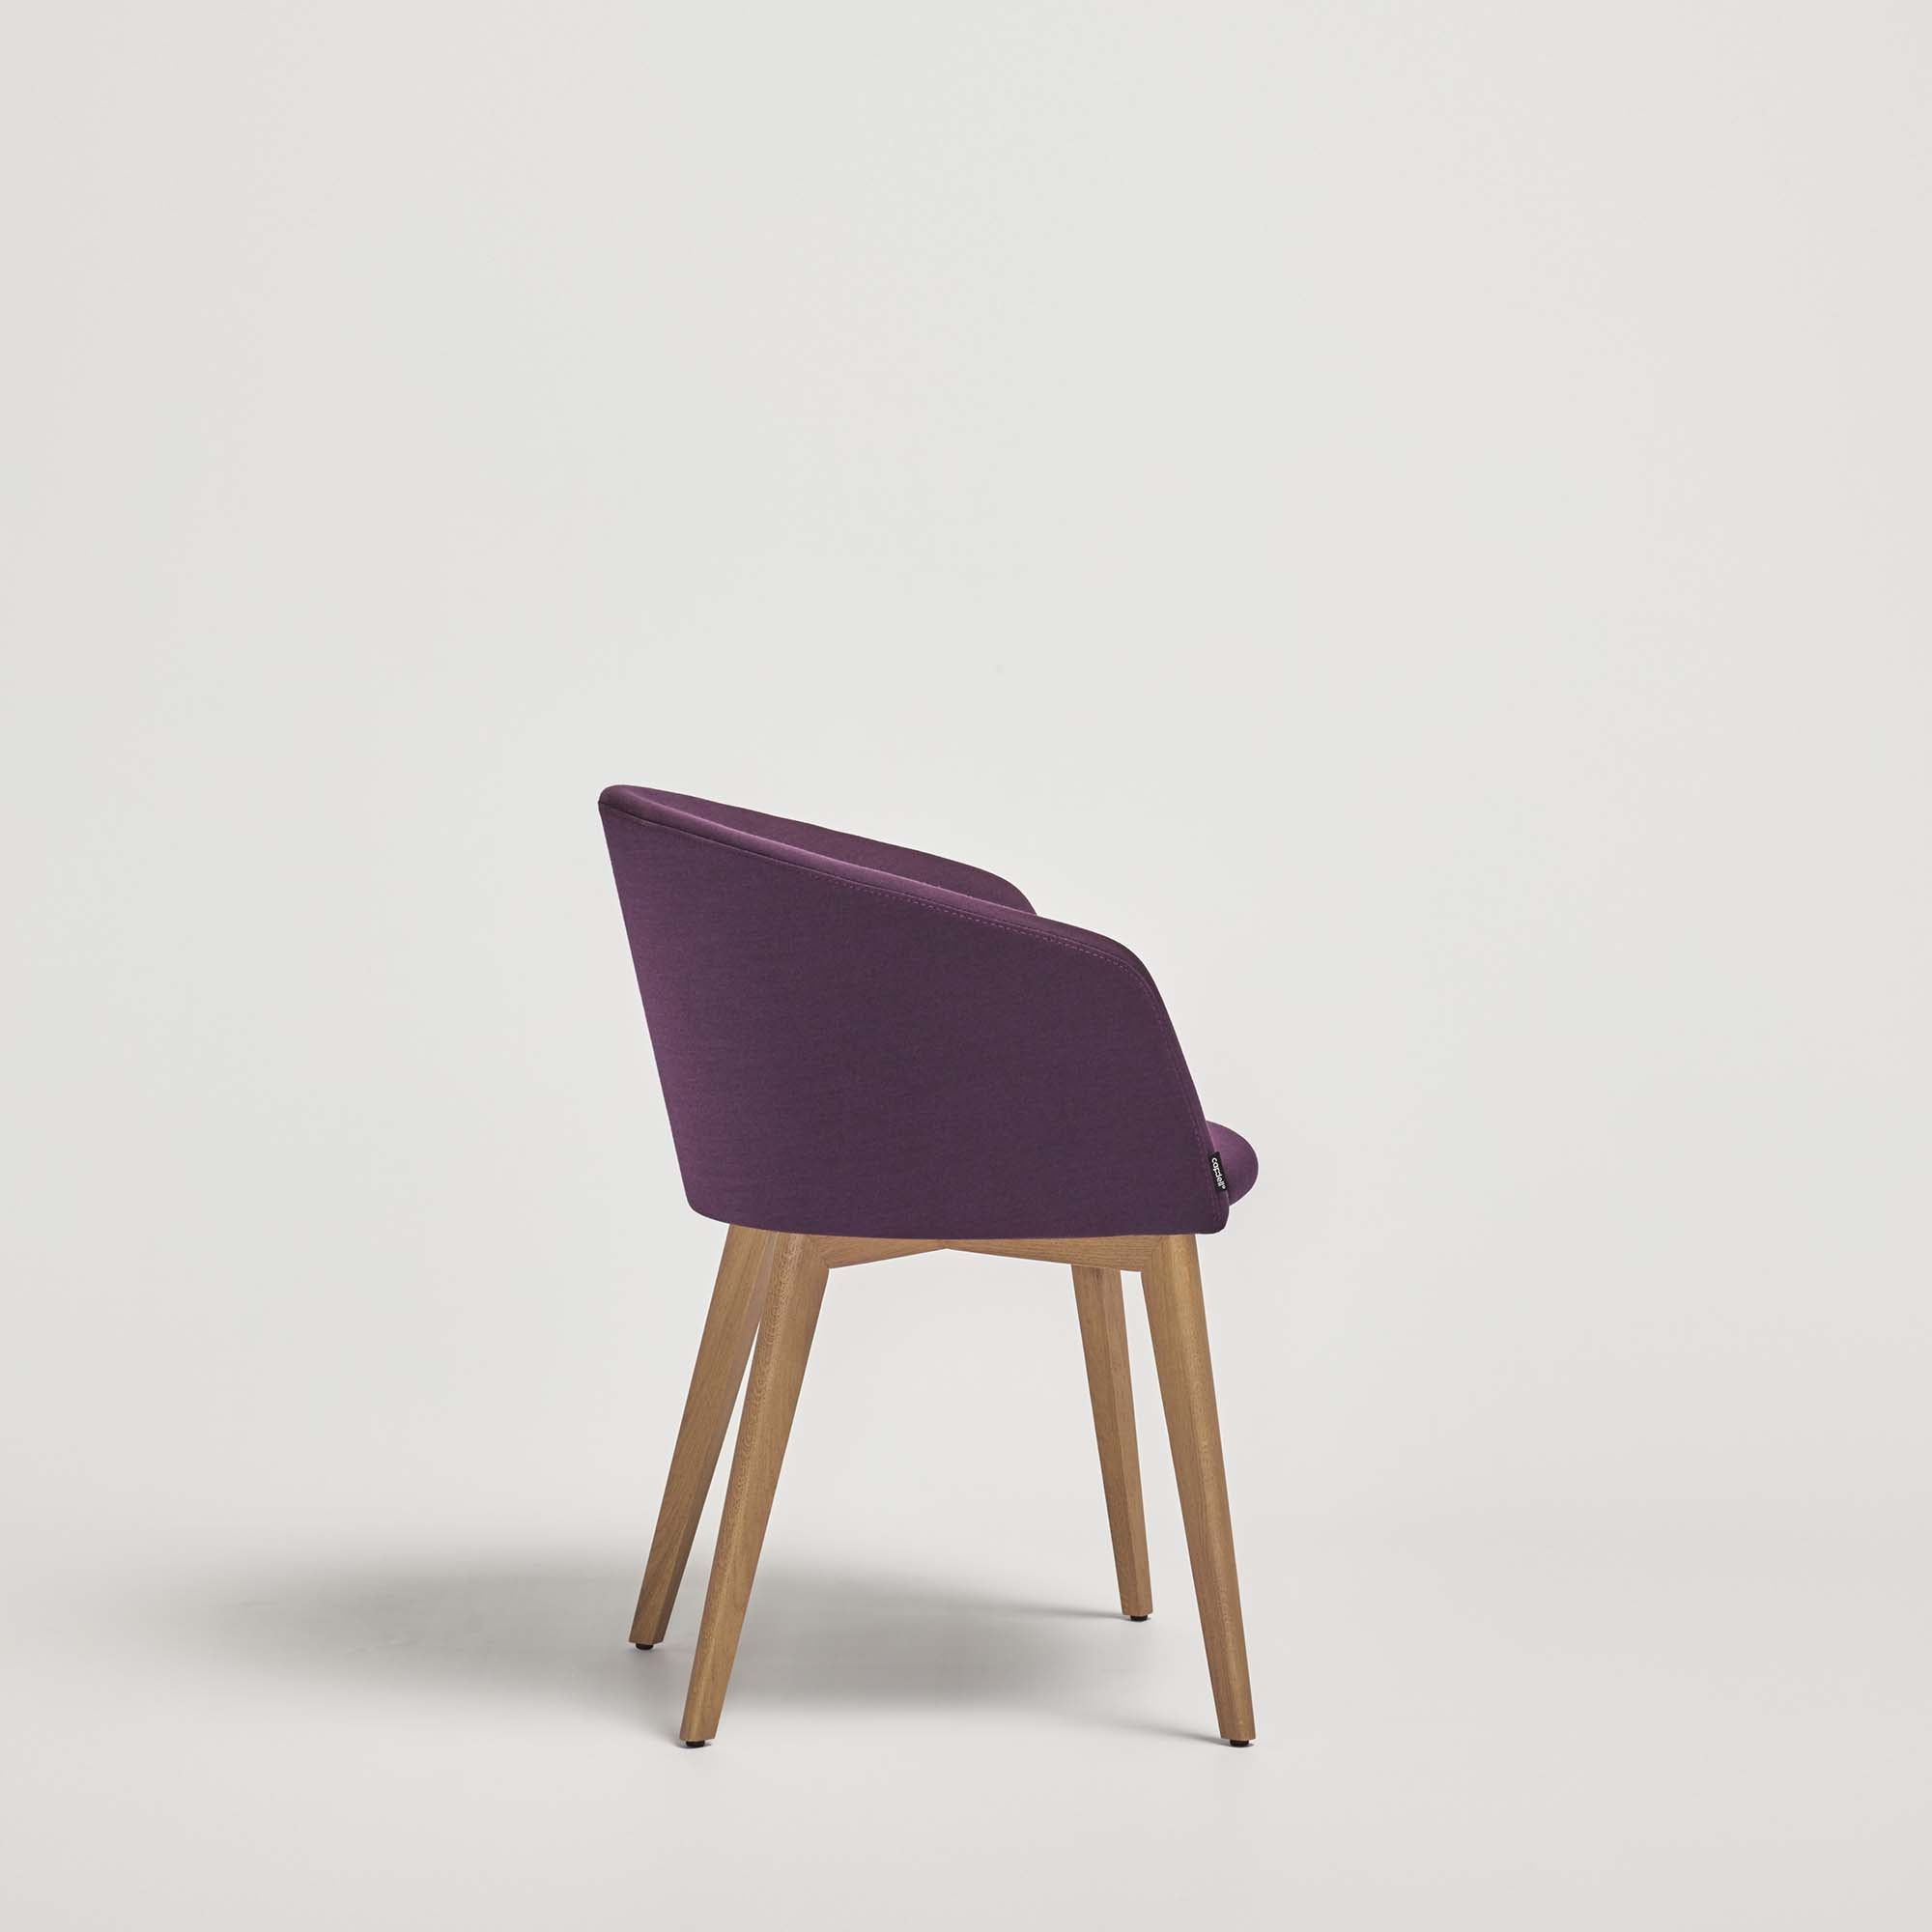 MOON Chair oak wood chair, dark natural colour, purple fabric upholstery side view